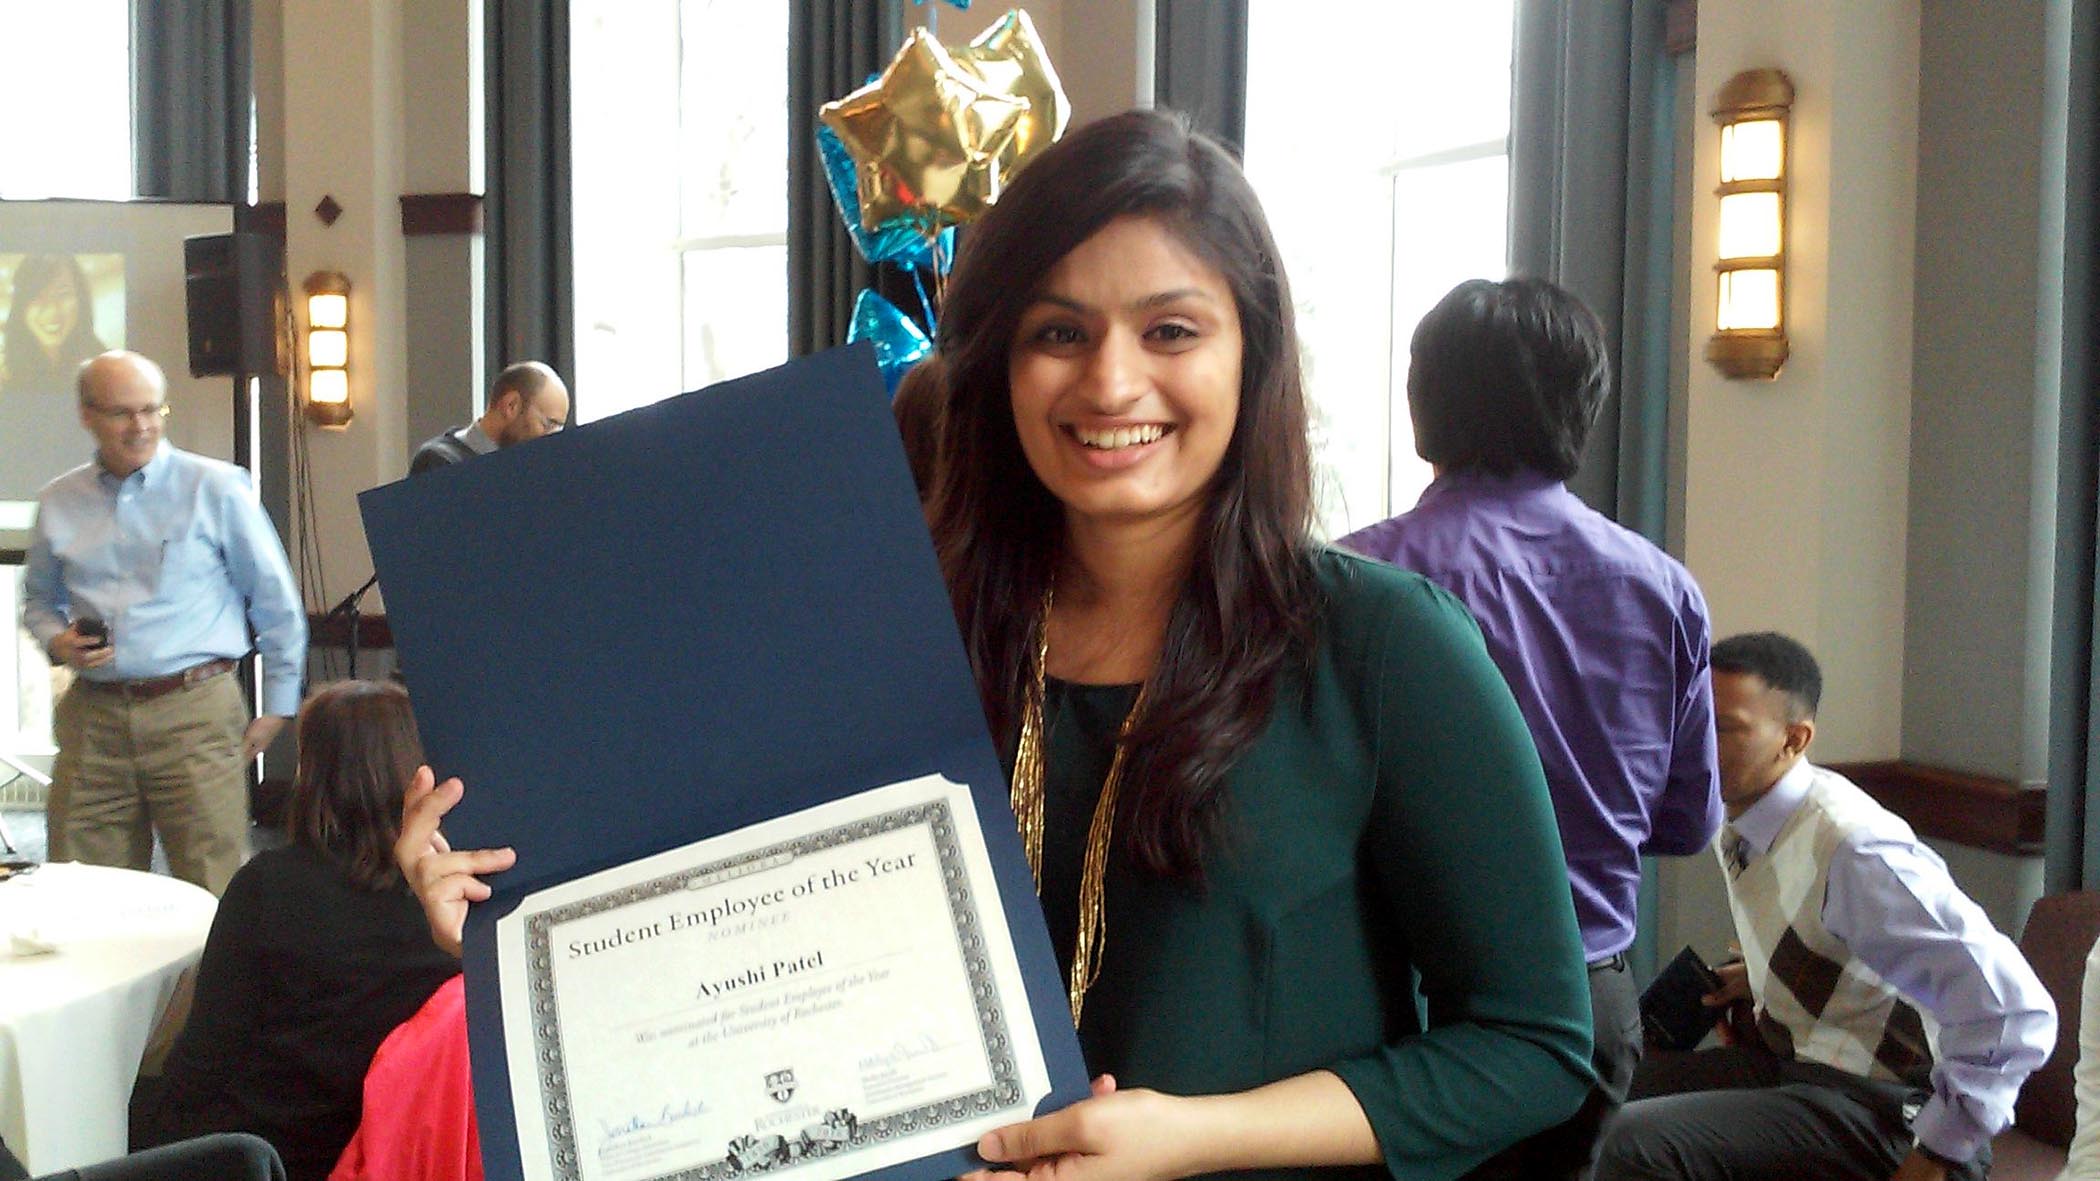 Student Employee of the Year nominee, Ayushi Patel, and an international student